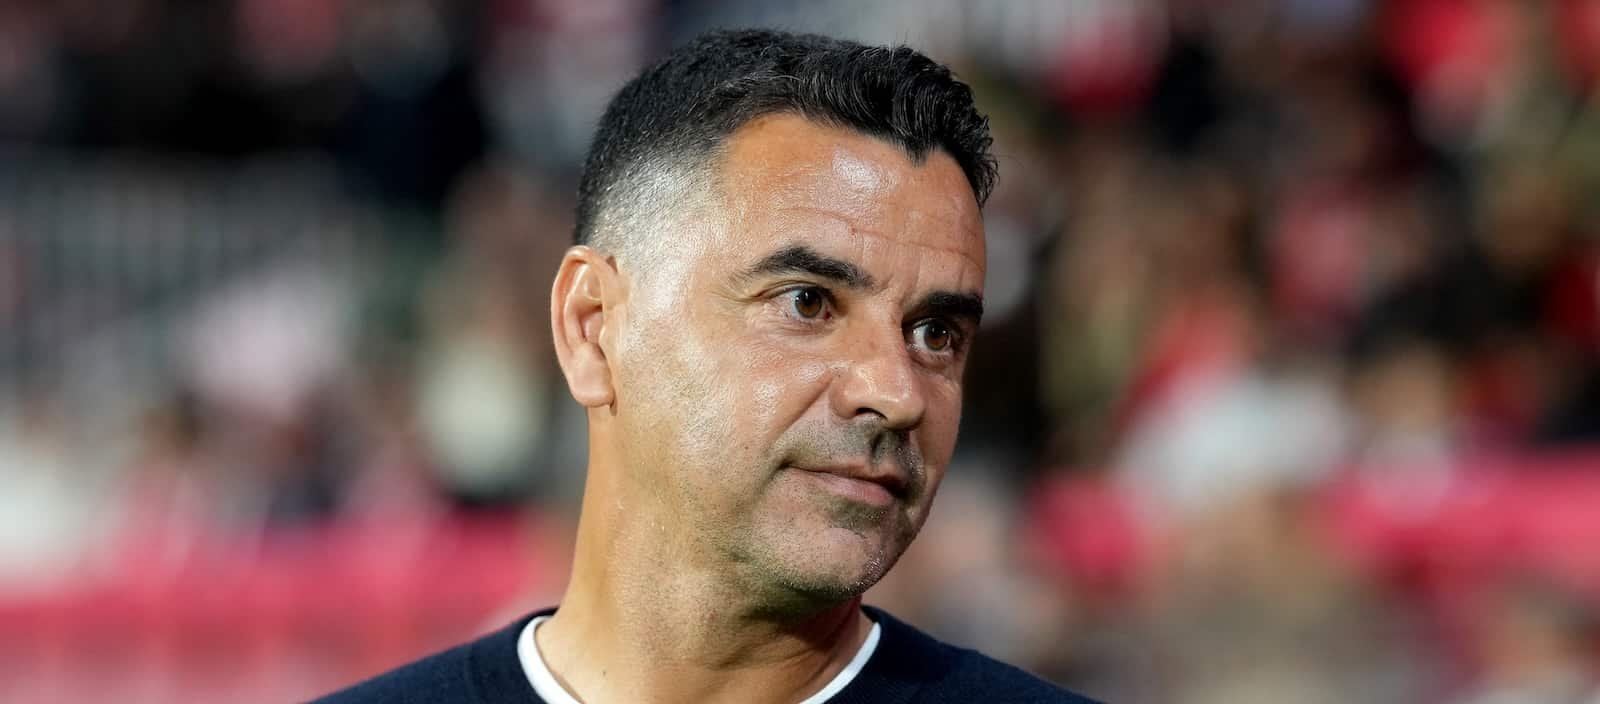 Manchester United target Míchel Sánchez as Erik ten Hag replacement - Man United News And Transfer News - The Peoples Person